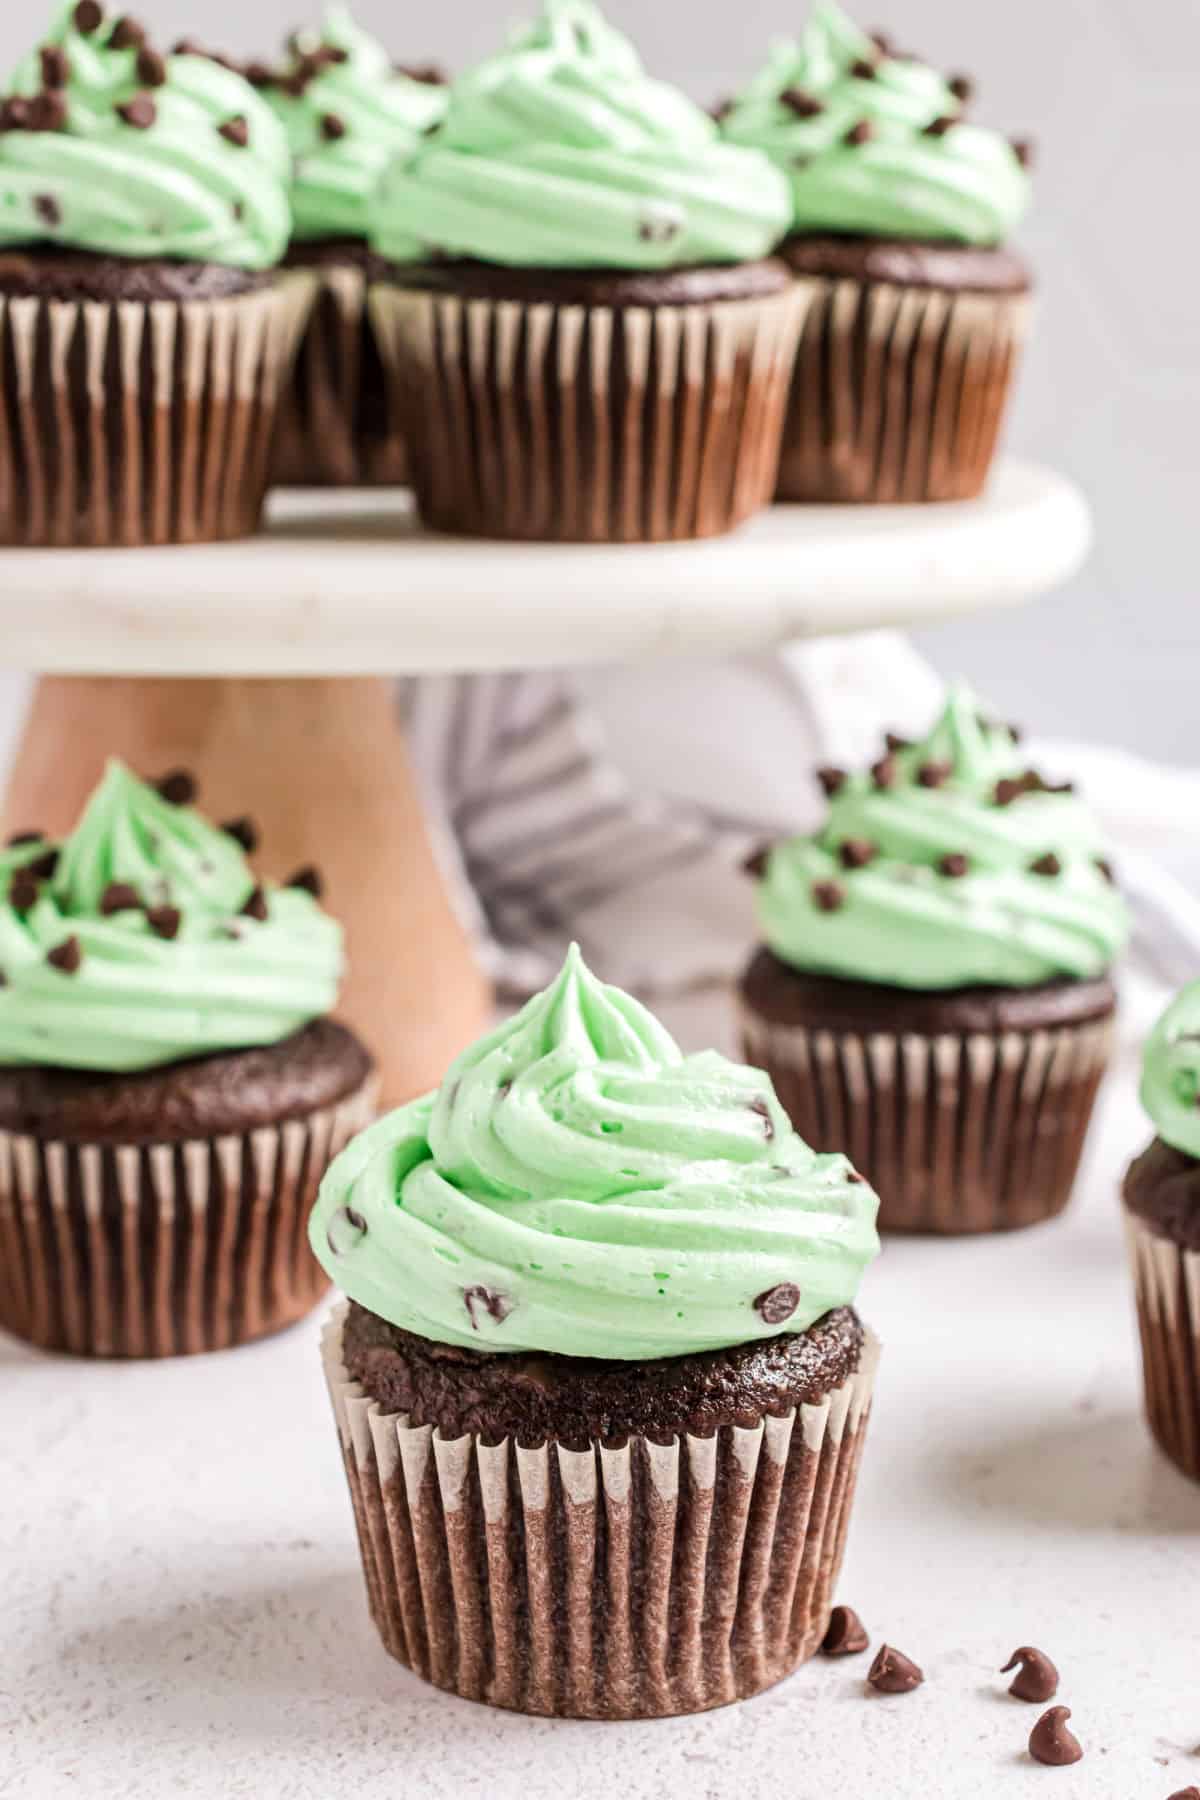 Chocolate cupcakes with green mint chocolate chip frosting.